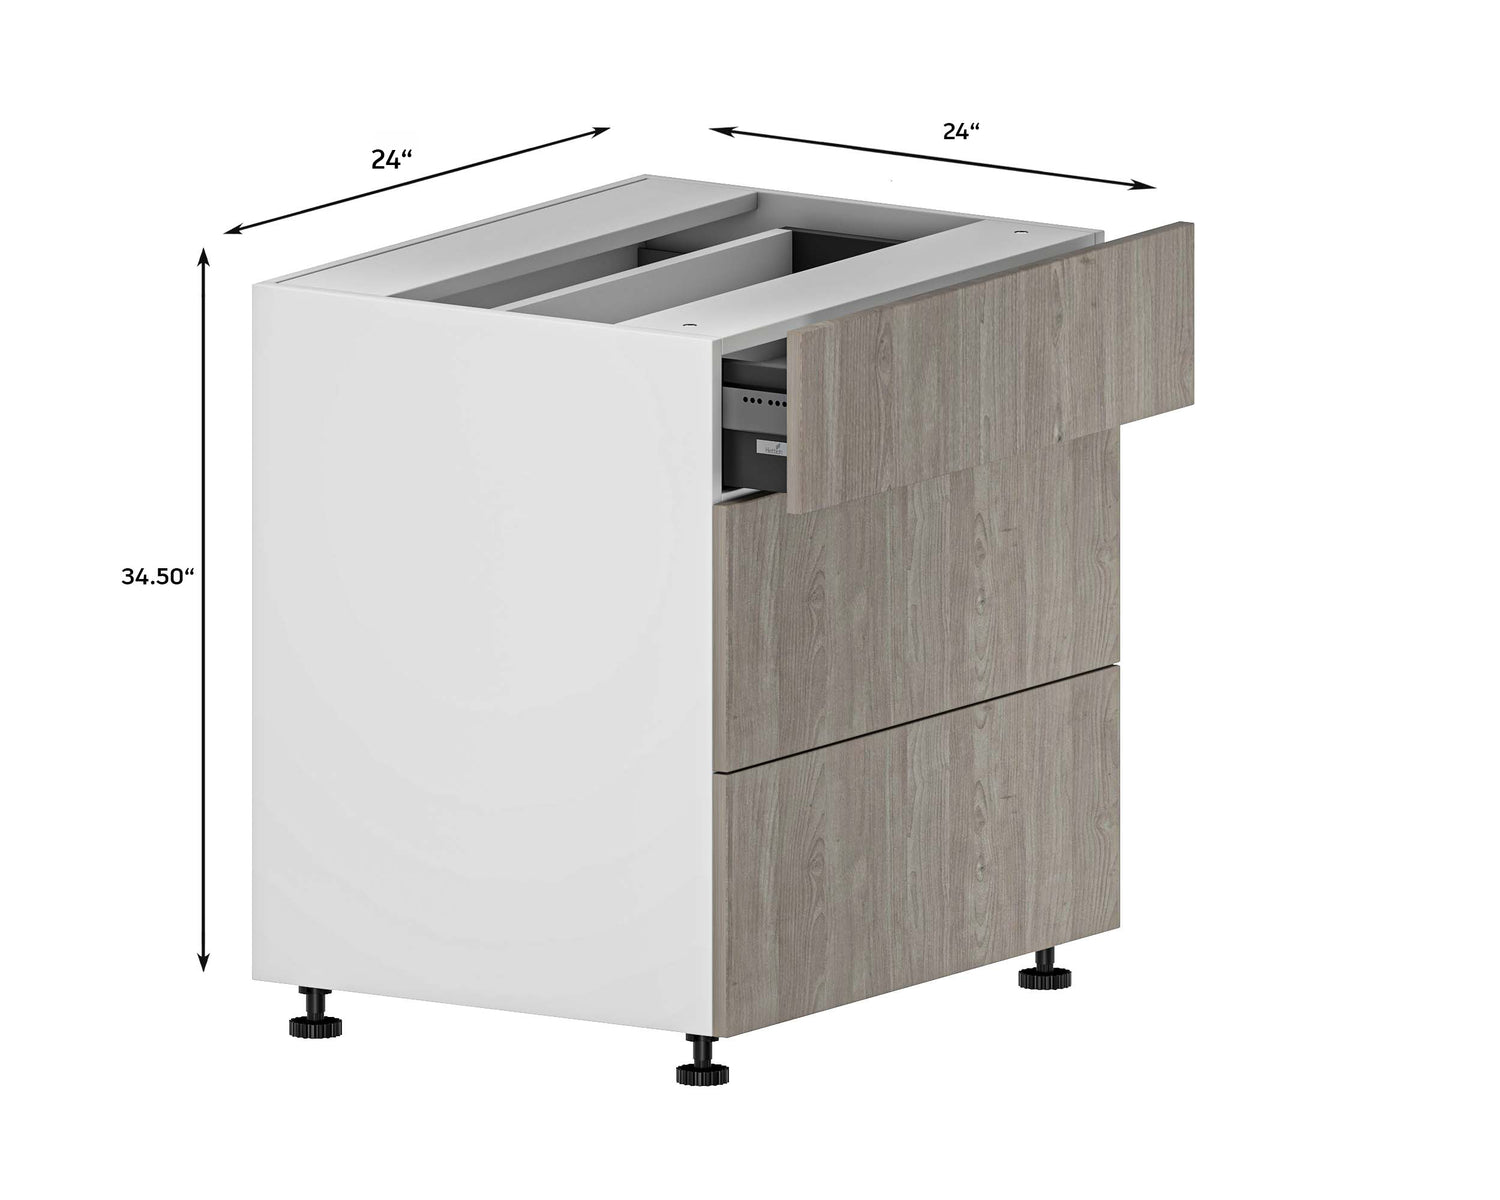 Quick Assemble Modern Style with Soft Close 24 in Base Kitchen Cabinet, 3 Drawer (24 in W x 24 in D x 34.50 in H) -  Pro-Edge HD